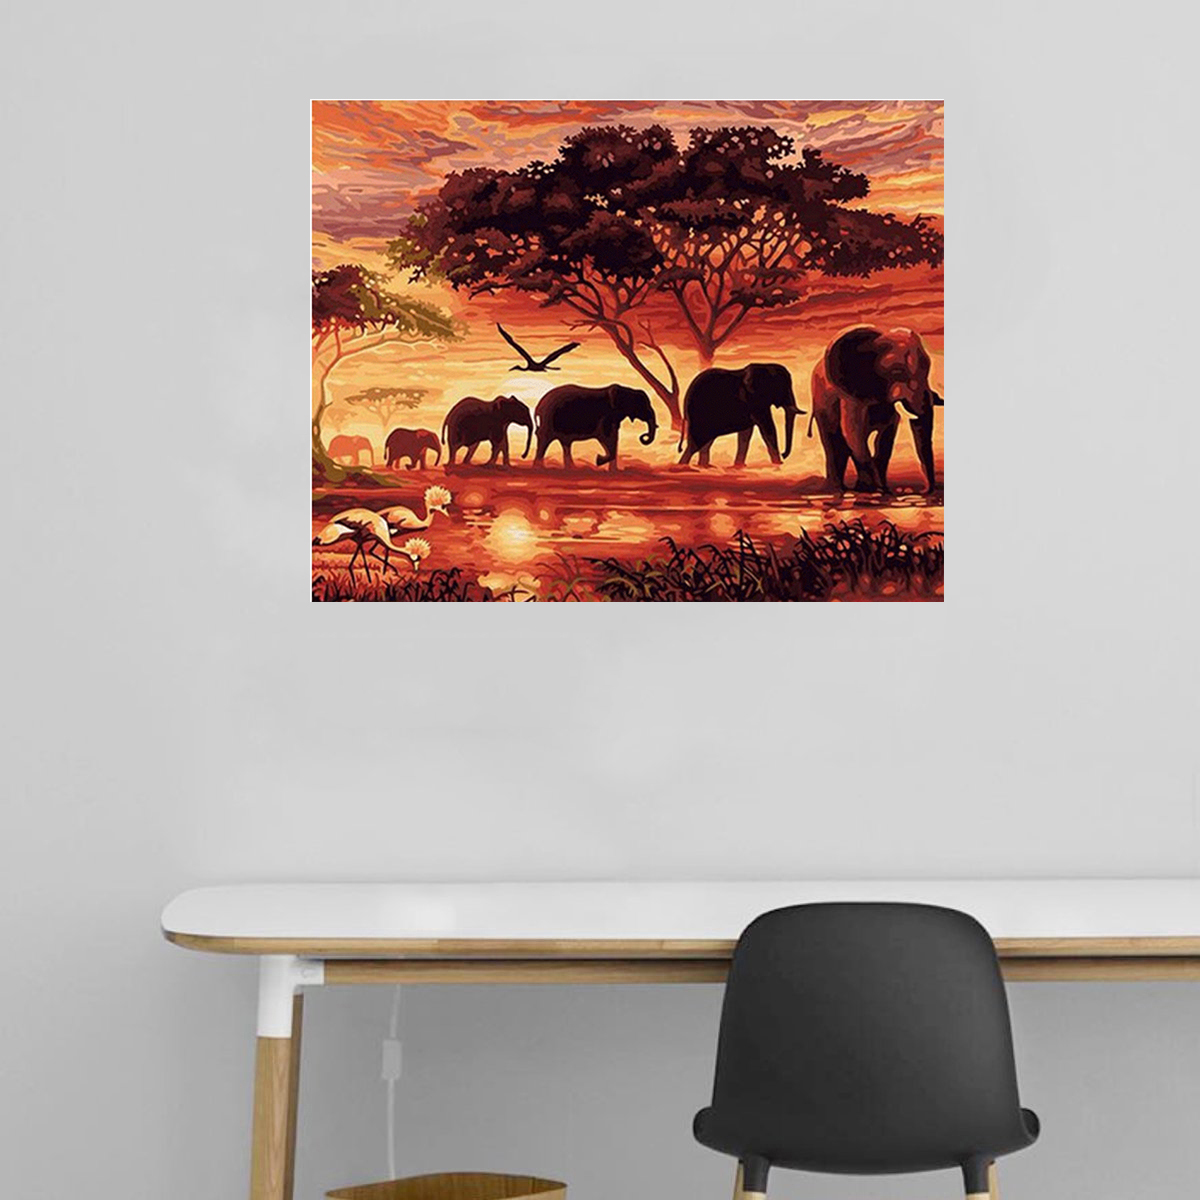 DIY-Diamond-Painting-Elephant-Scenery-Wall-Painting-Hanging-Pictures-Handmade-Wall-Decorations-Gifts-1744020-10